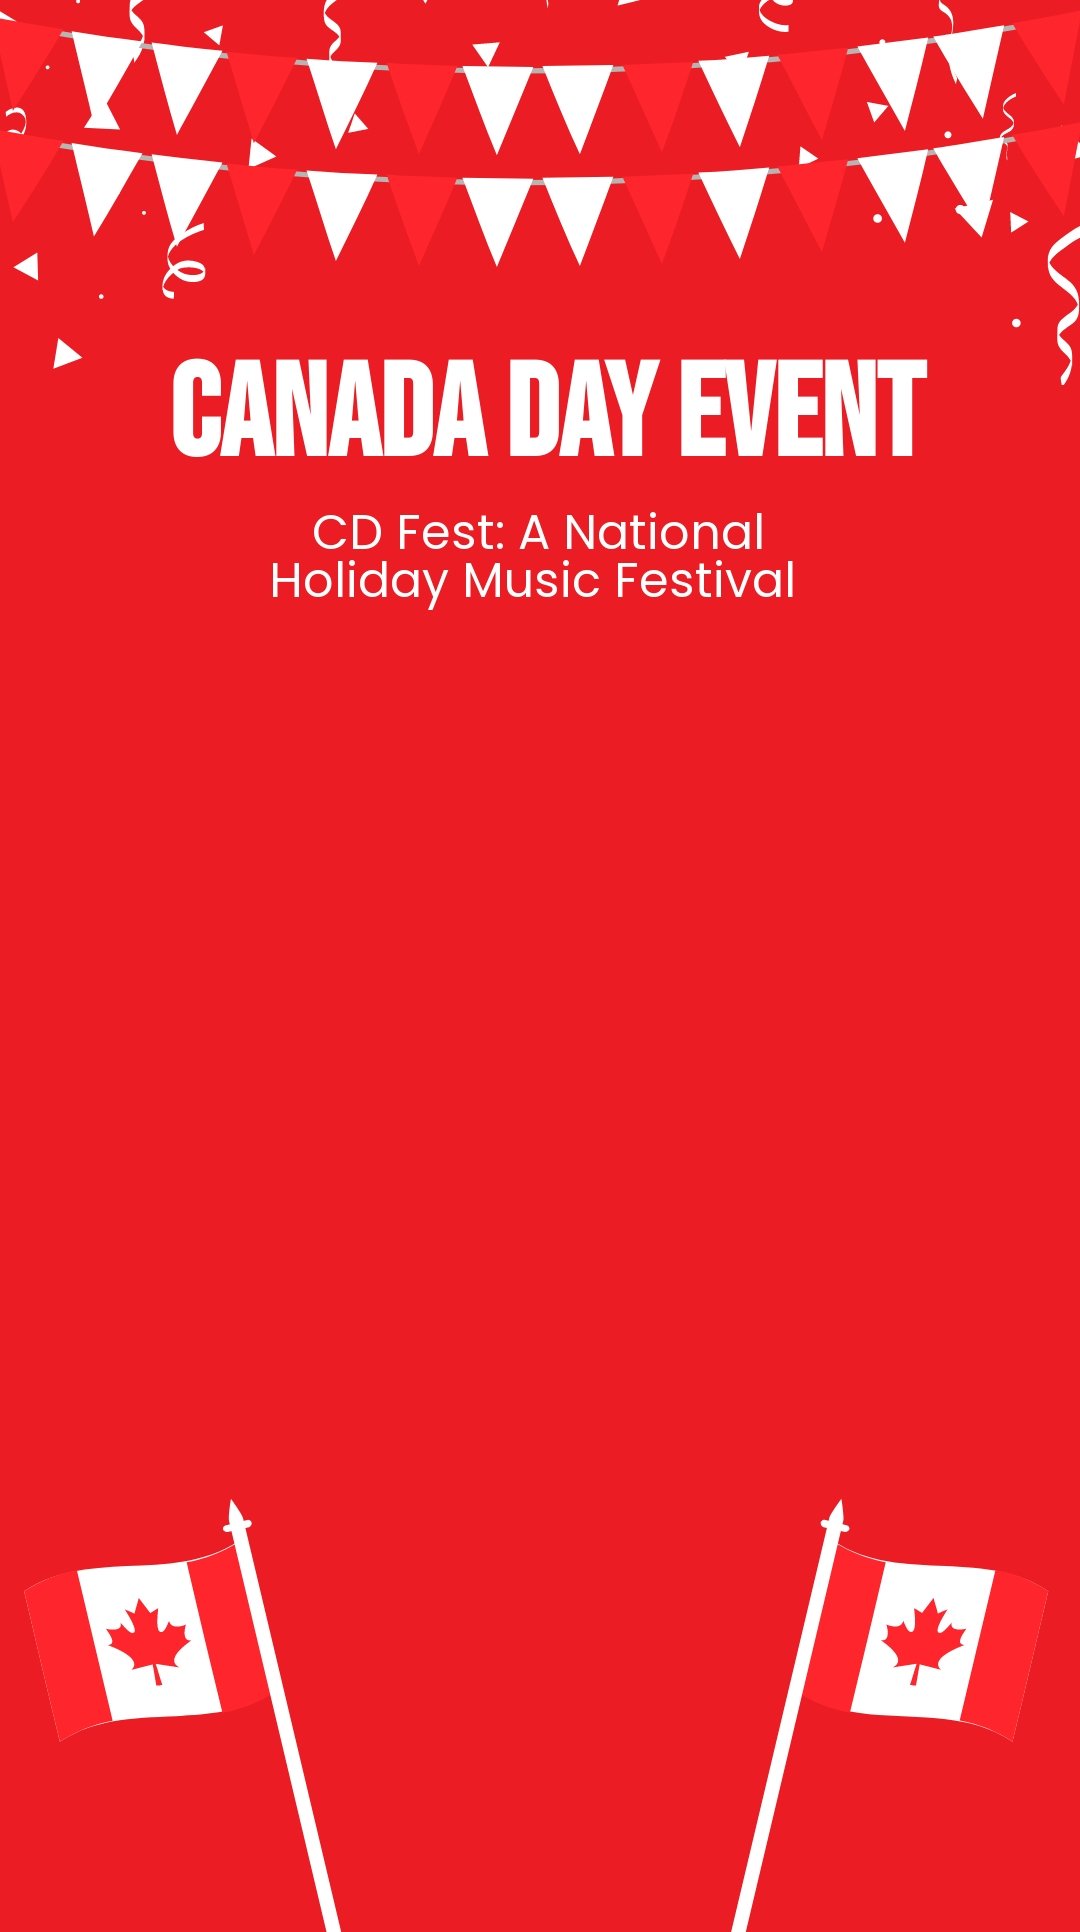 Canada Day Event Snapchat Geofilter Template